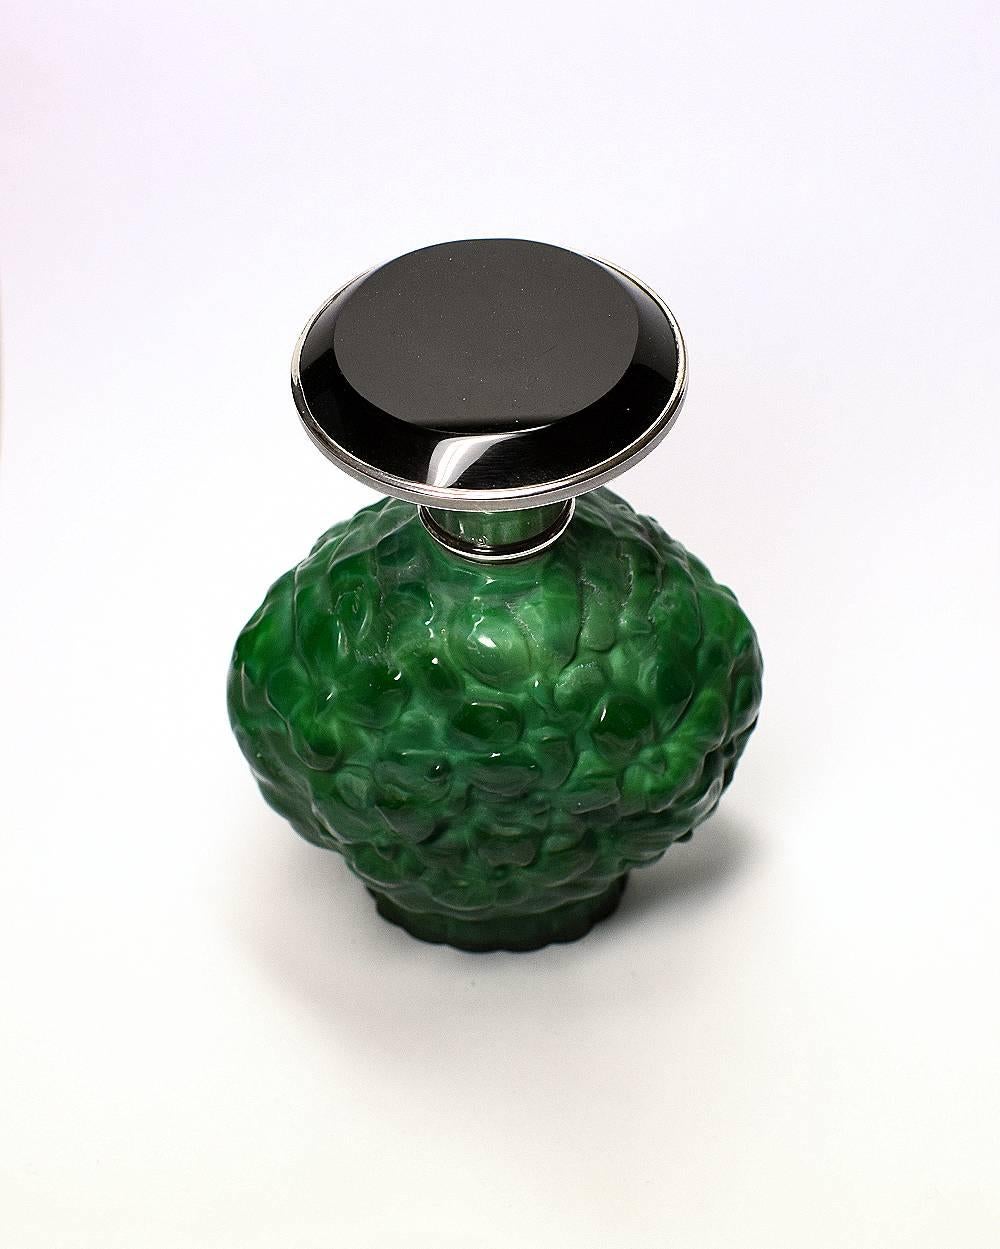 Beautiful 1930s Art Deco green malachite glass perfume bottle with solid silver and black glass lid. Made in Czechoslovakia. This wonderful piece comes to you in excellent condition with no flaws to mention.